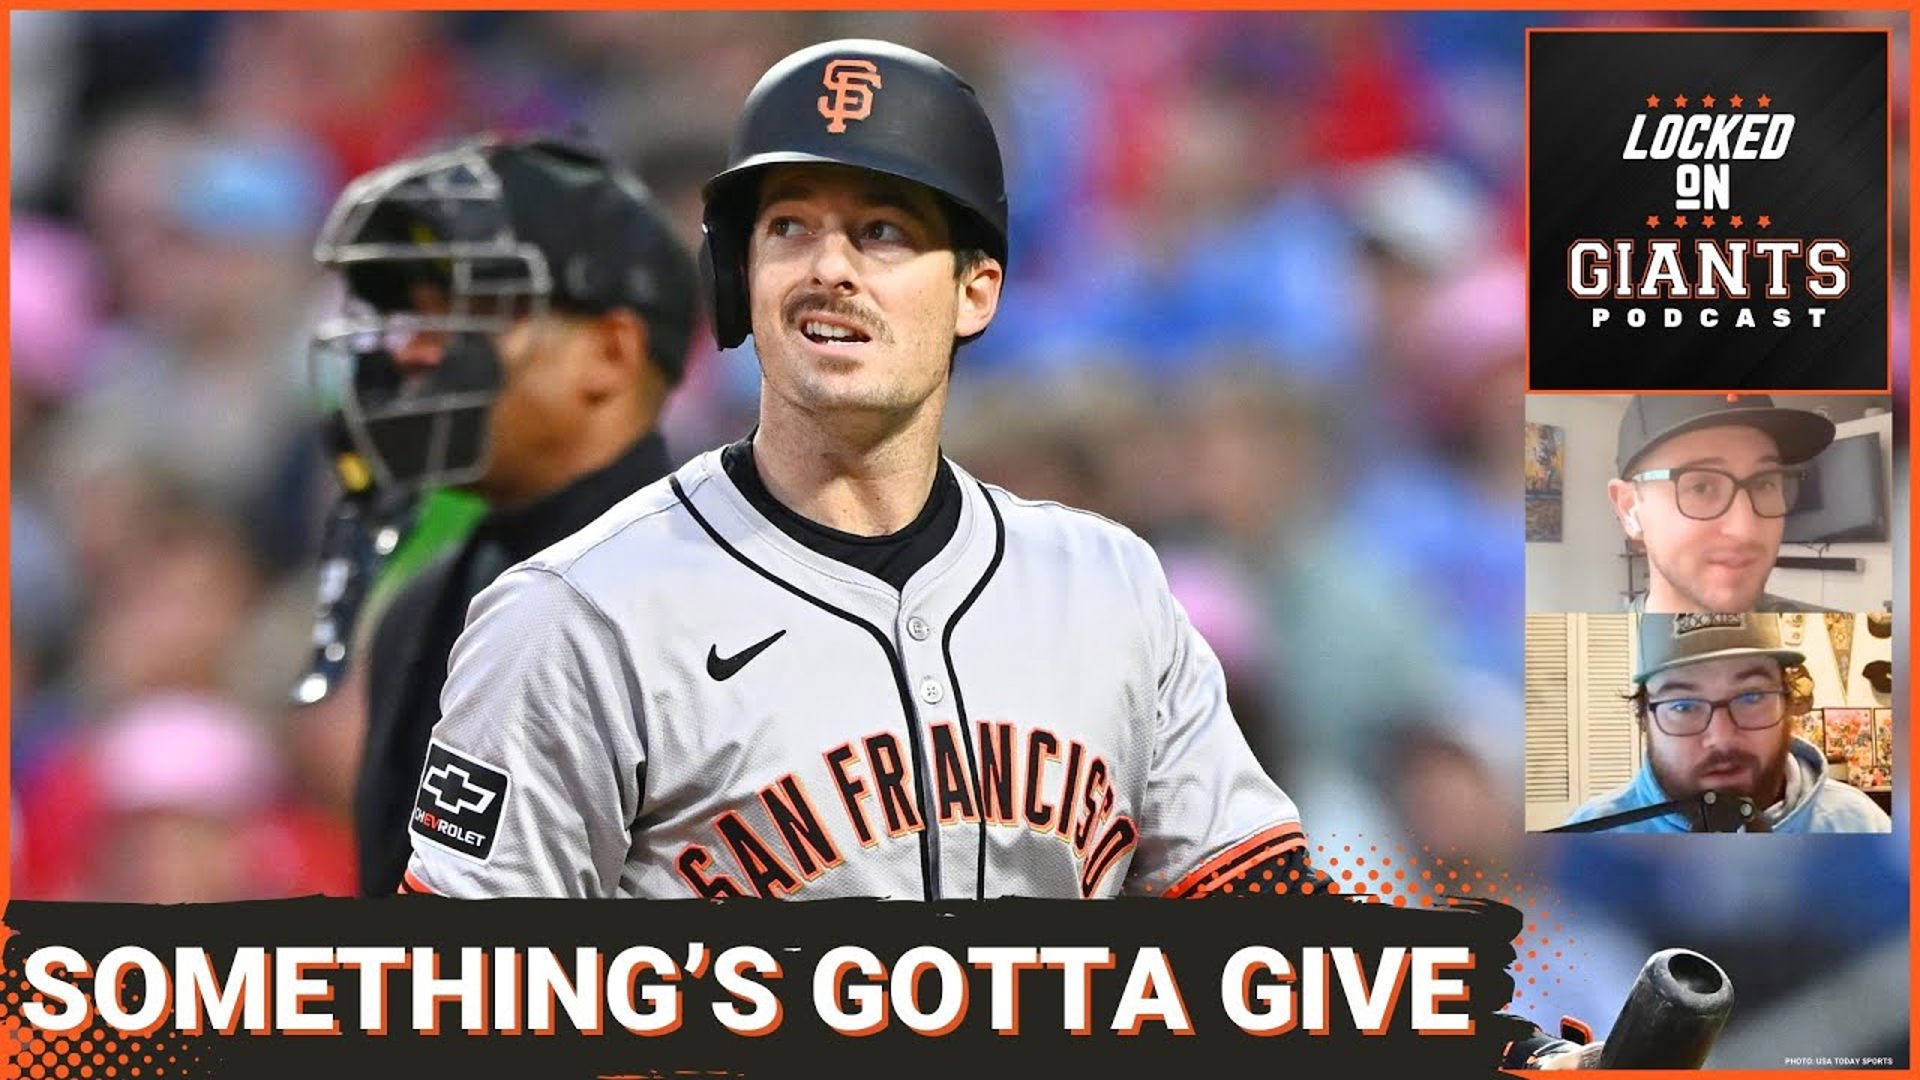 SF Giants vs Rockies. Something's Gotta Give as Struggling Teams Square Off